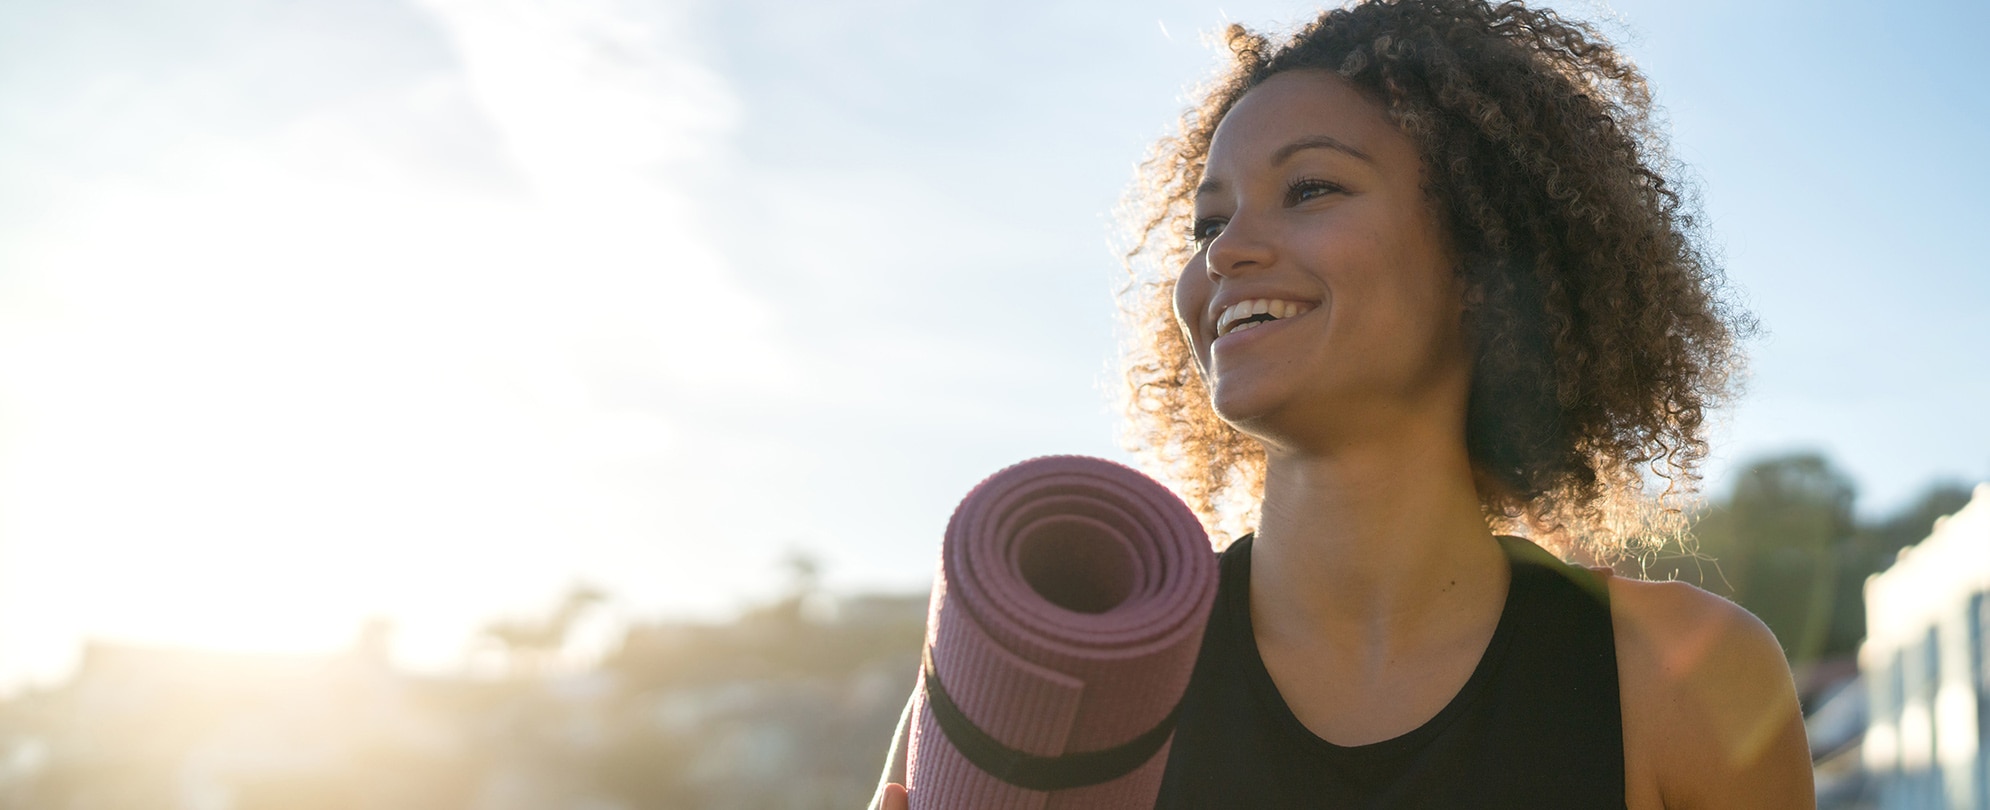 A smiling woman carrying a yoga mat